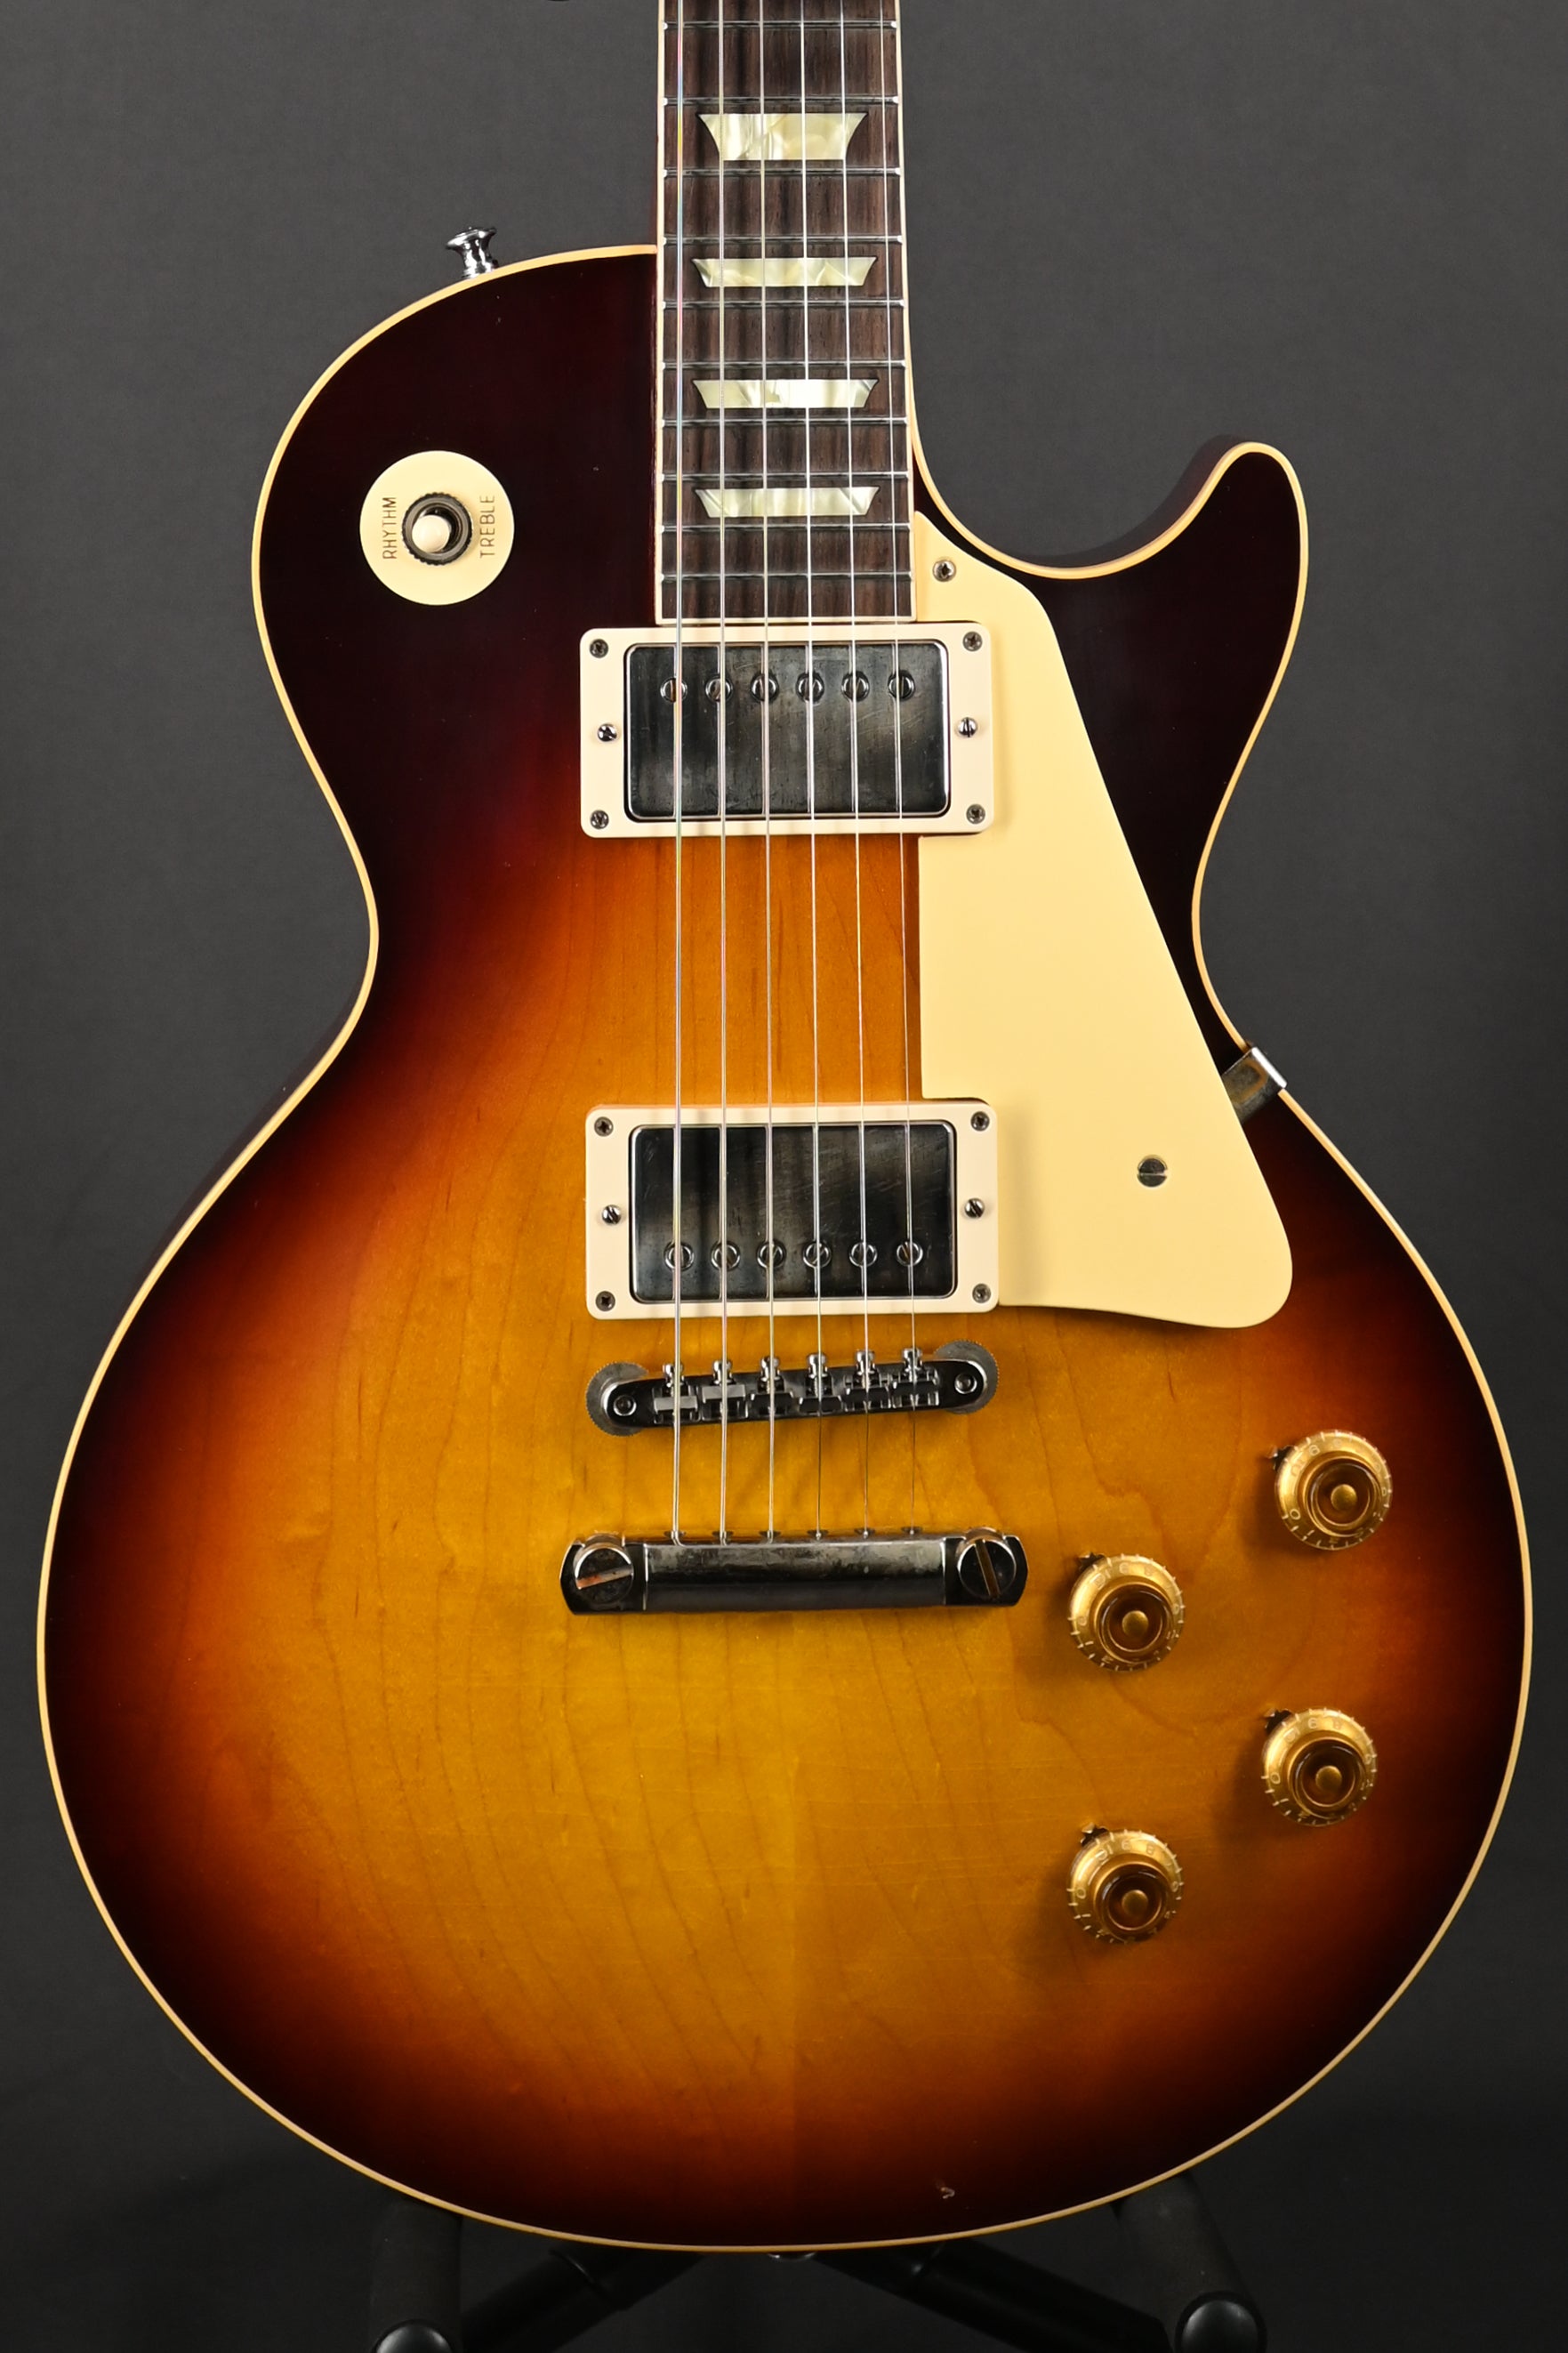 '59 Les Paul Standard Reissue Electric Guitar - Murphy Lab Ultra Light Aged Southern Fade